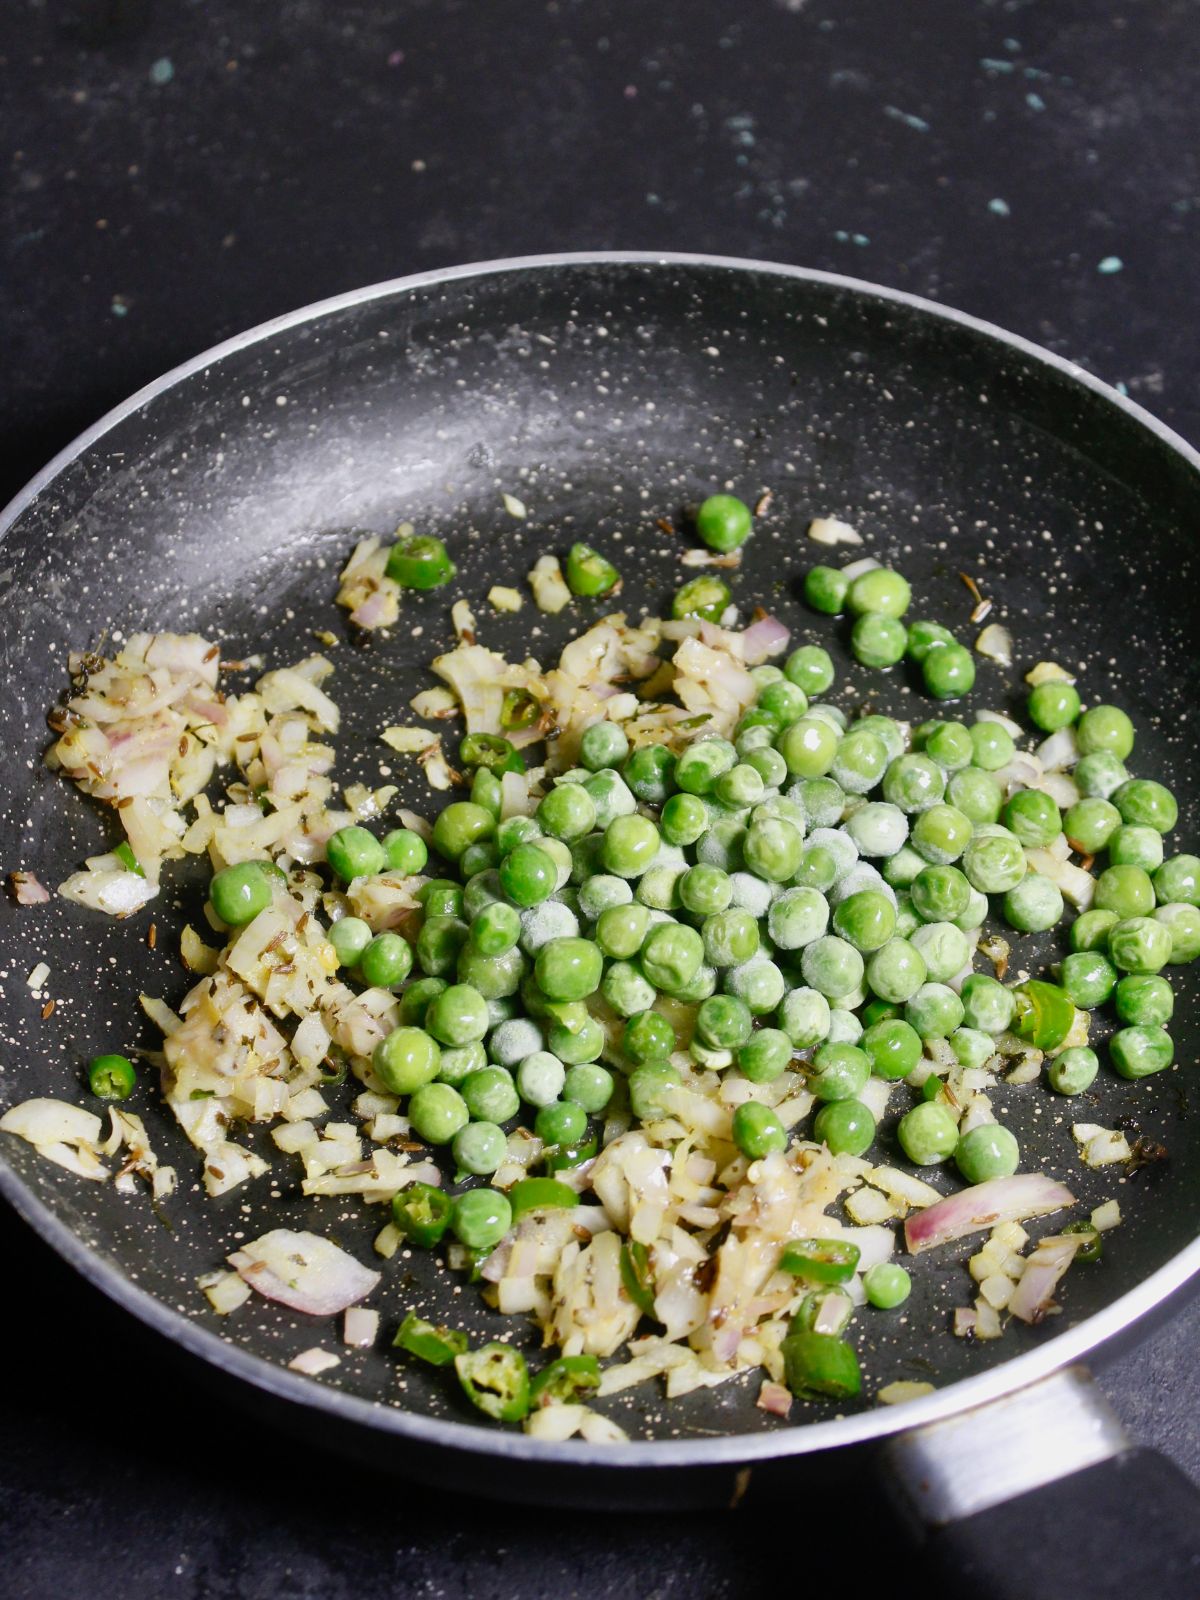 Add peas to the pan and mix well